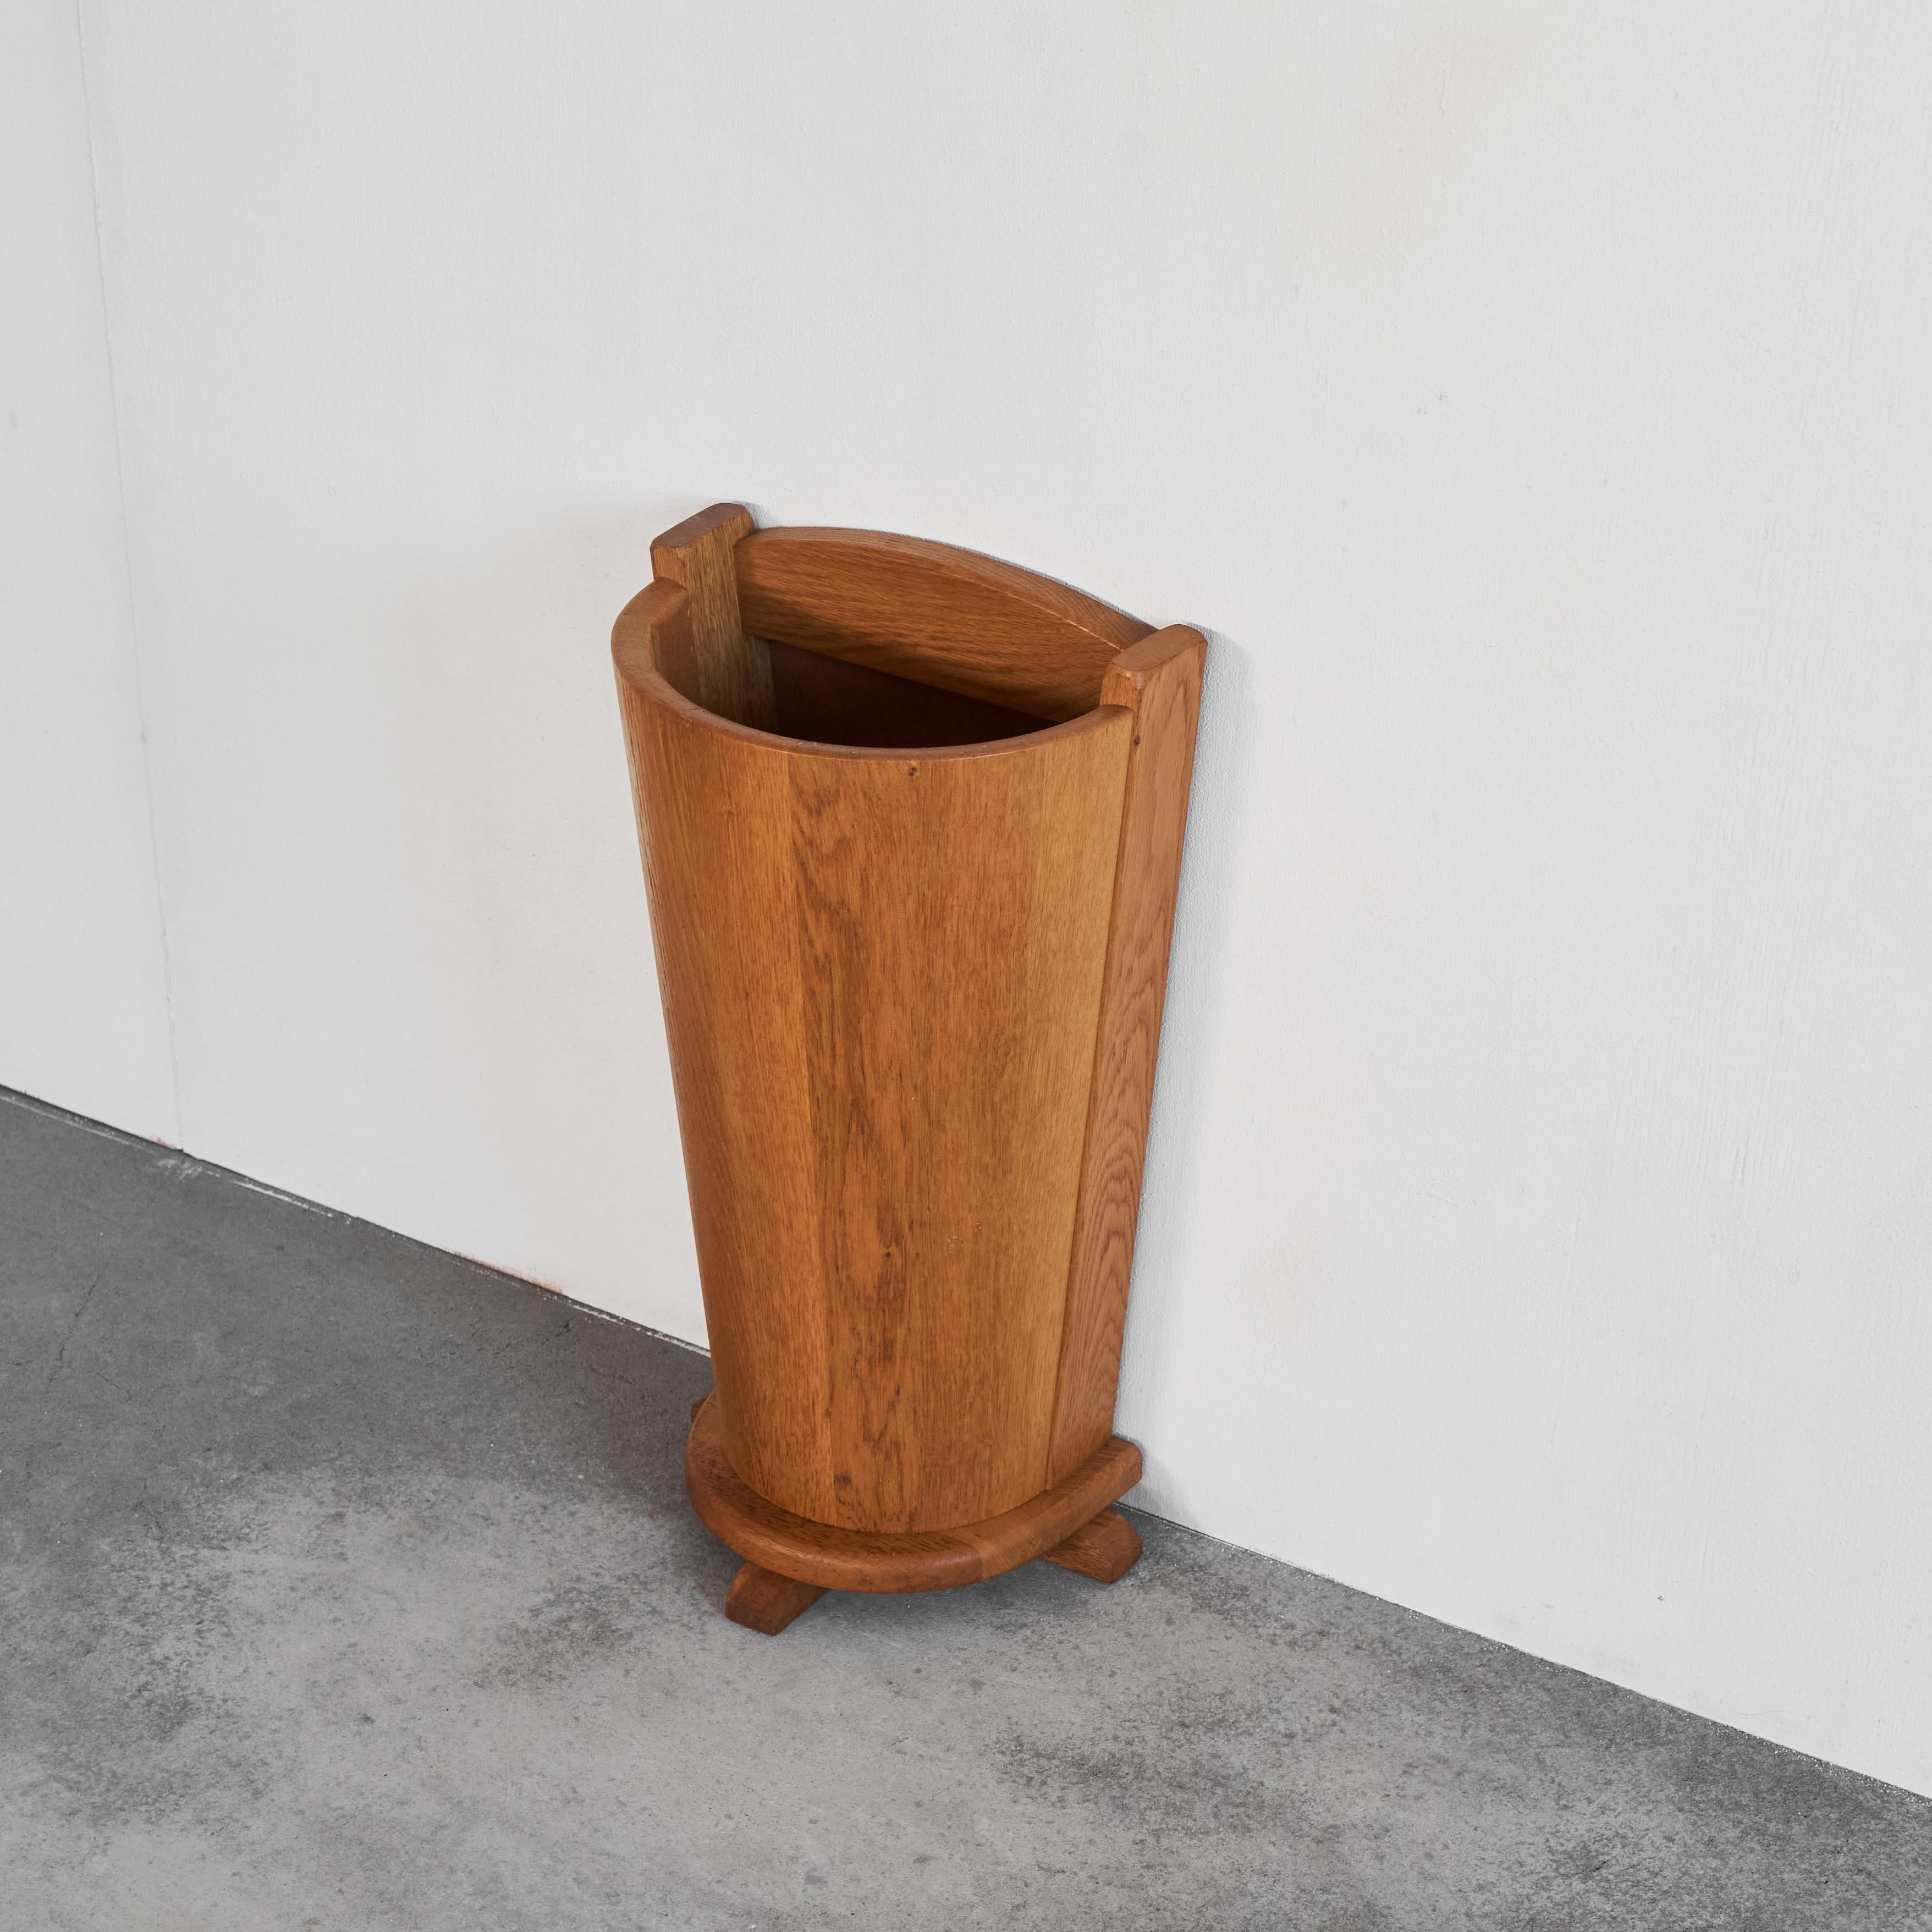 Back to Wall Umbrella Stand in Solid Oak, probably French, 1950s.

This is a wonderful back to wall umbrella stand, made from solid oak and with a very beautiful and modest modernist 'chalet' style. It most probably is a French design. It resembles